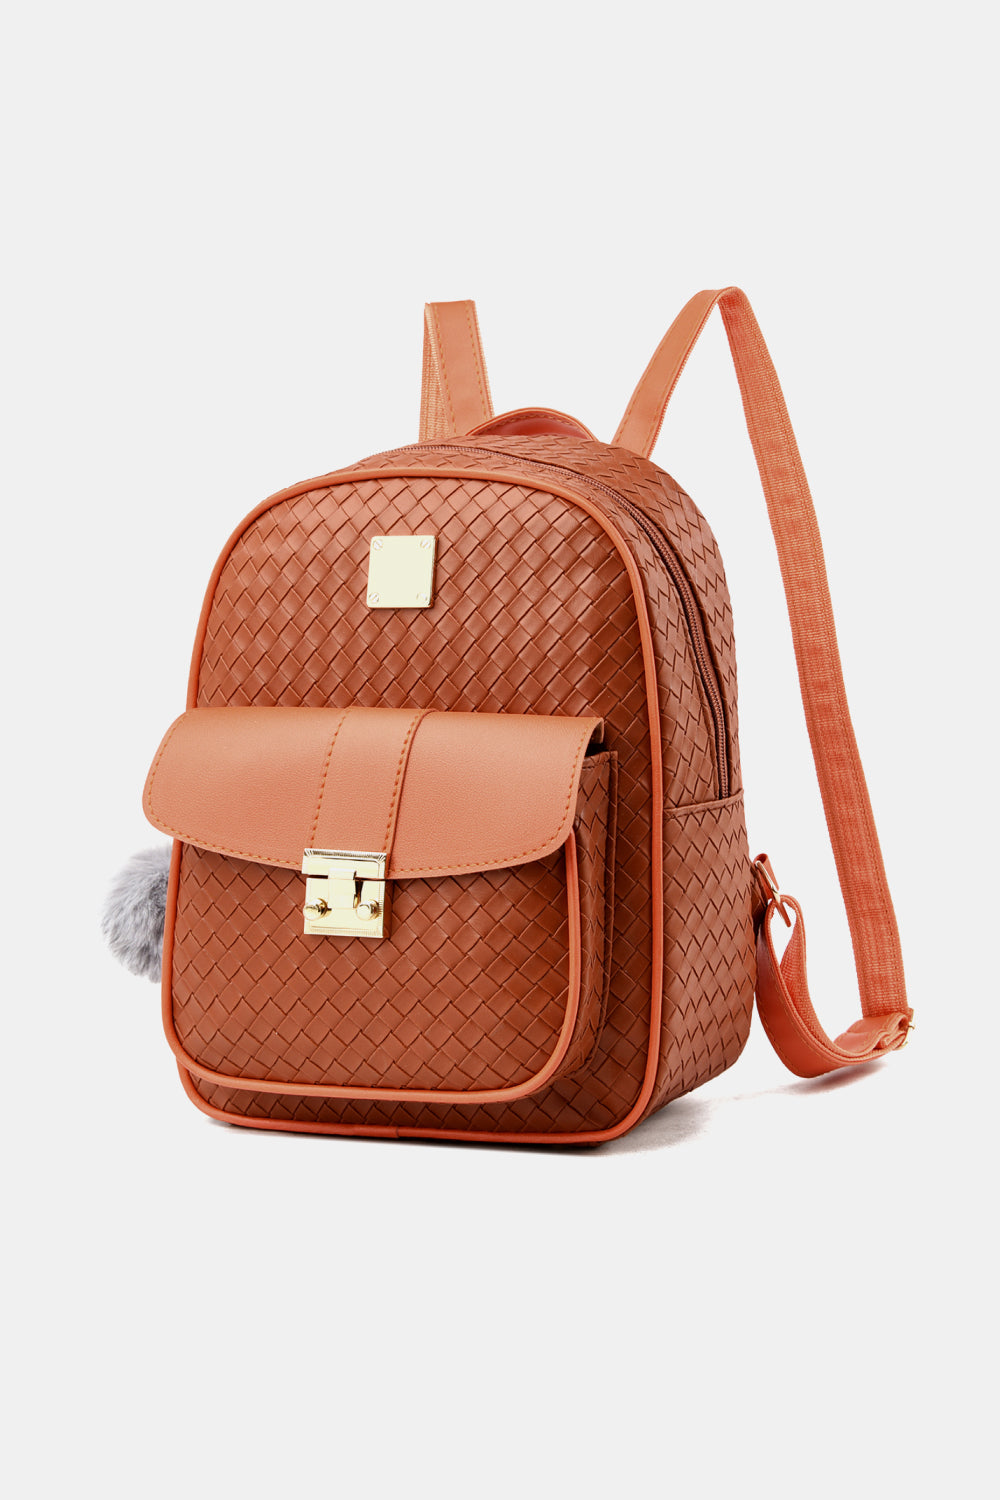 PU Leather Backpack with Pom-Pom Pendant